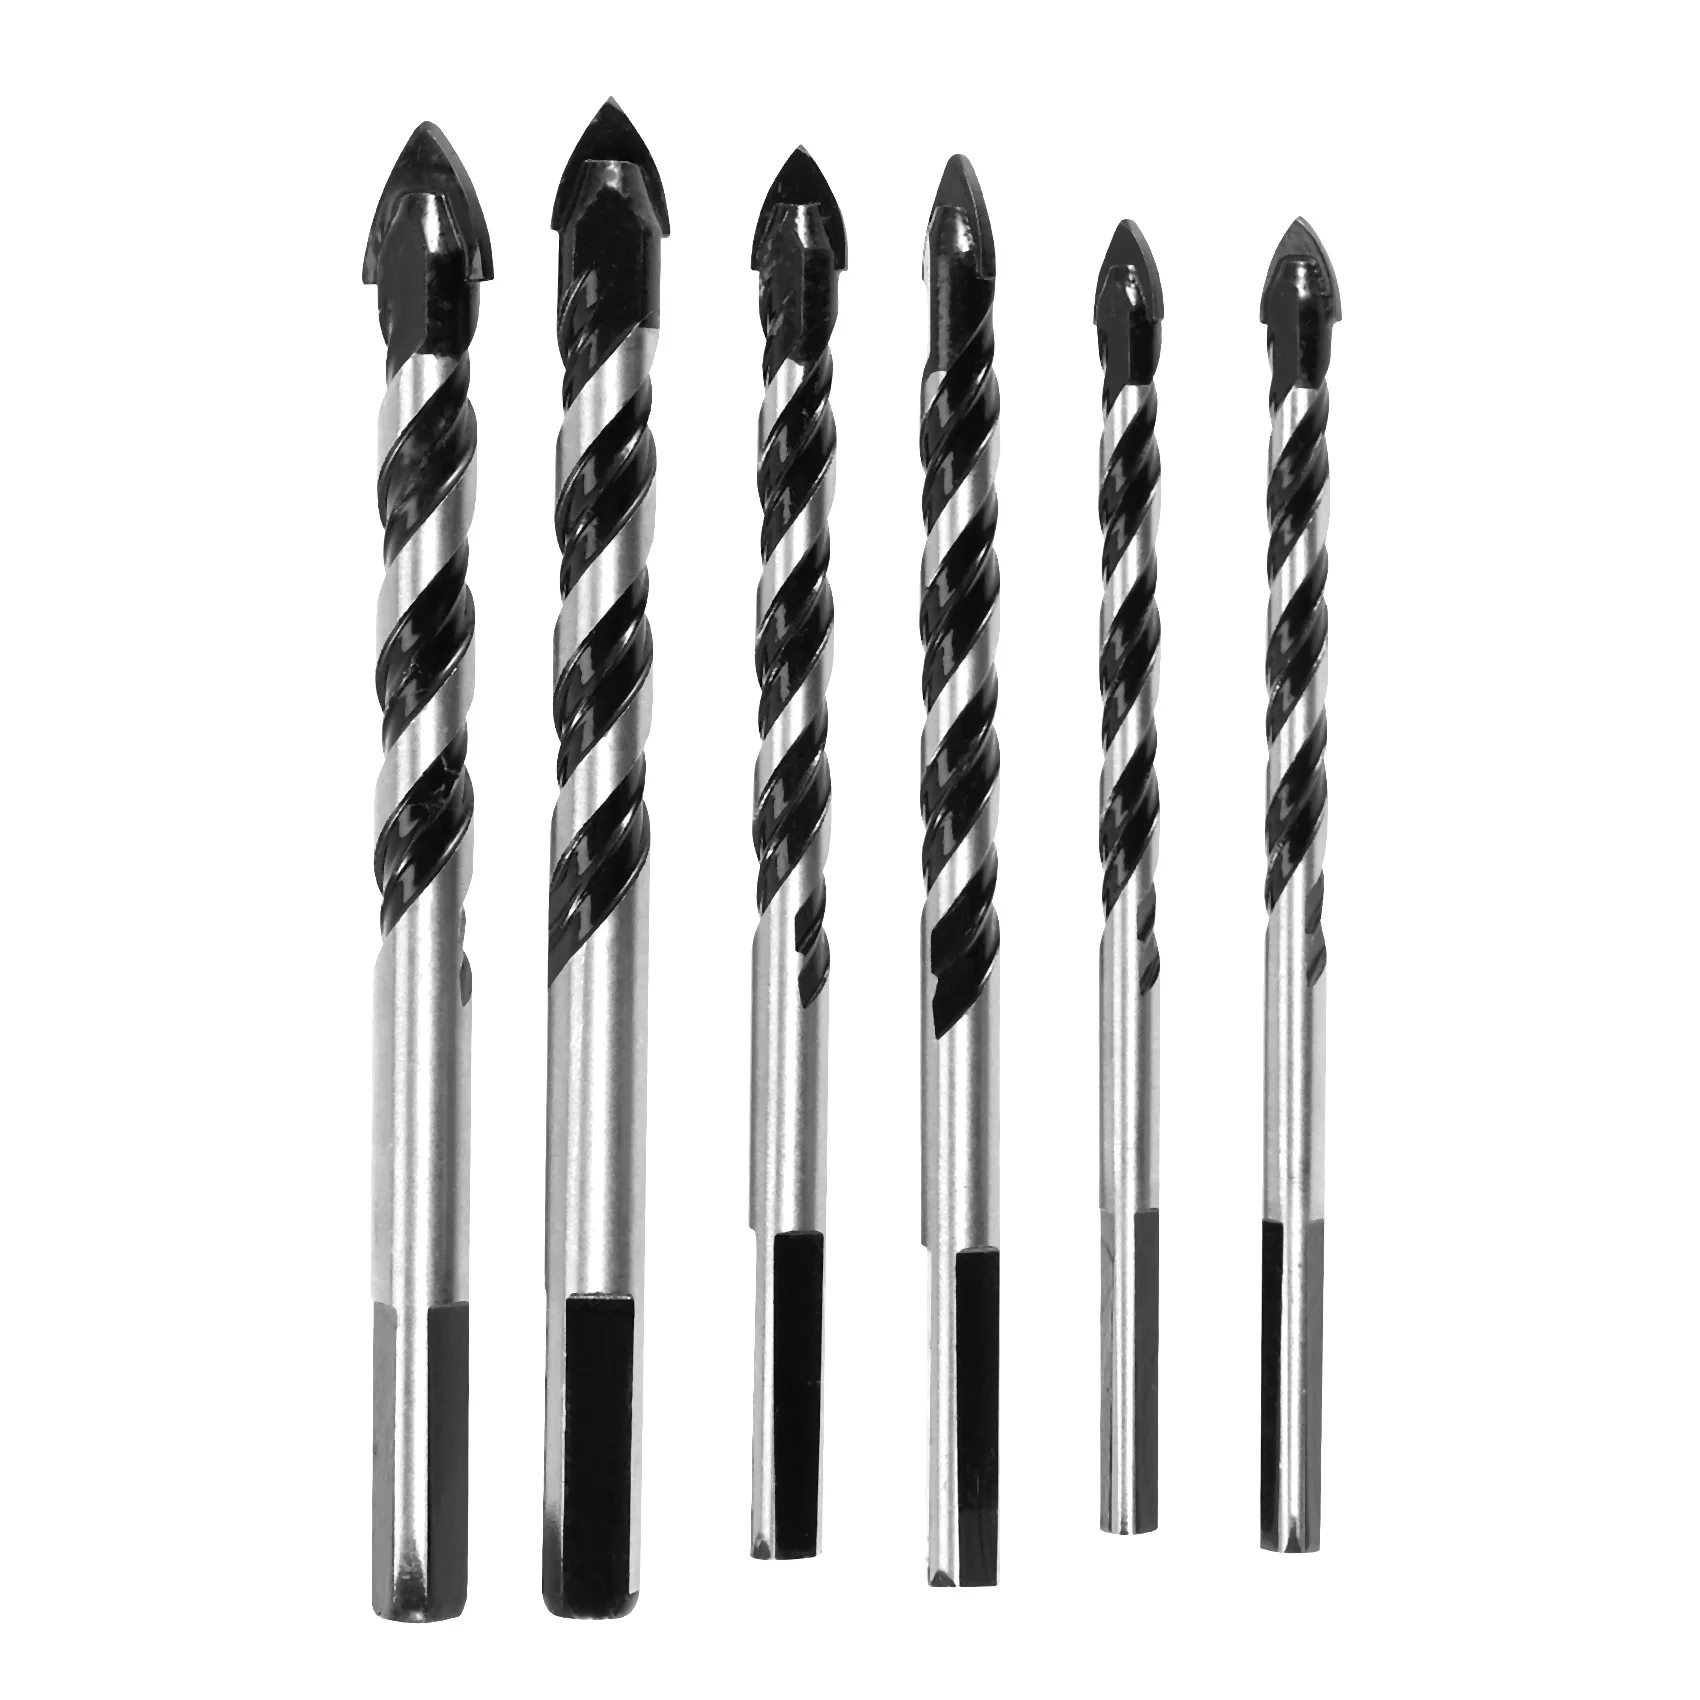 

6PCS Ceramic Tile Drill Bits,Masonry Drill Bits Set for Glass, Brick, Concrete, Wood Tungsten Carbide Tip for Wall Mirror and